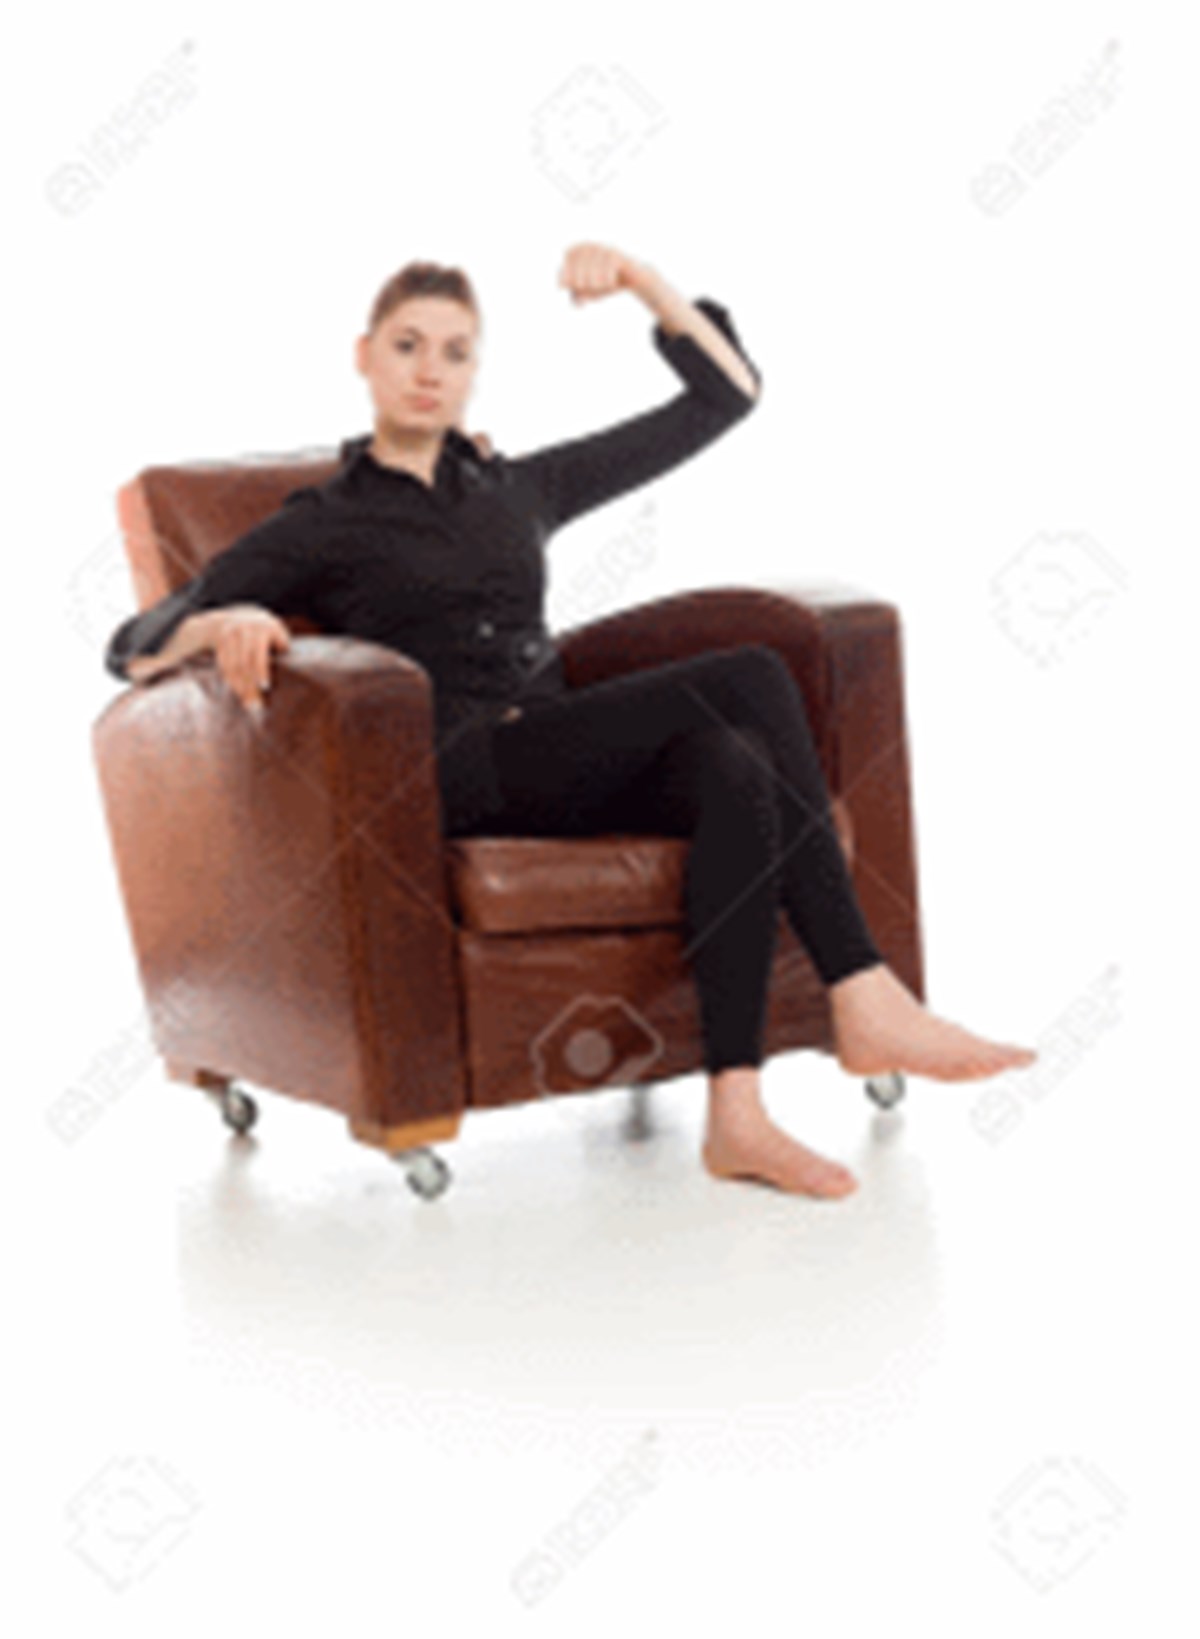 armchair exercise.png